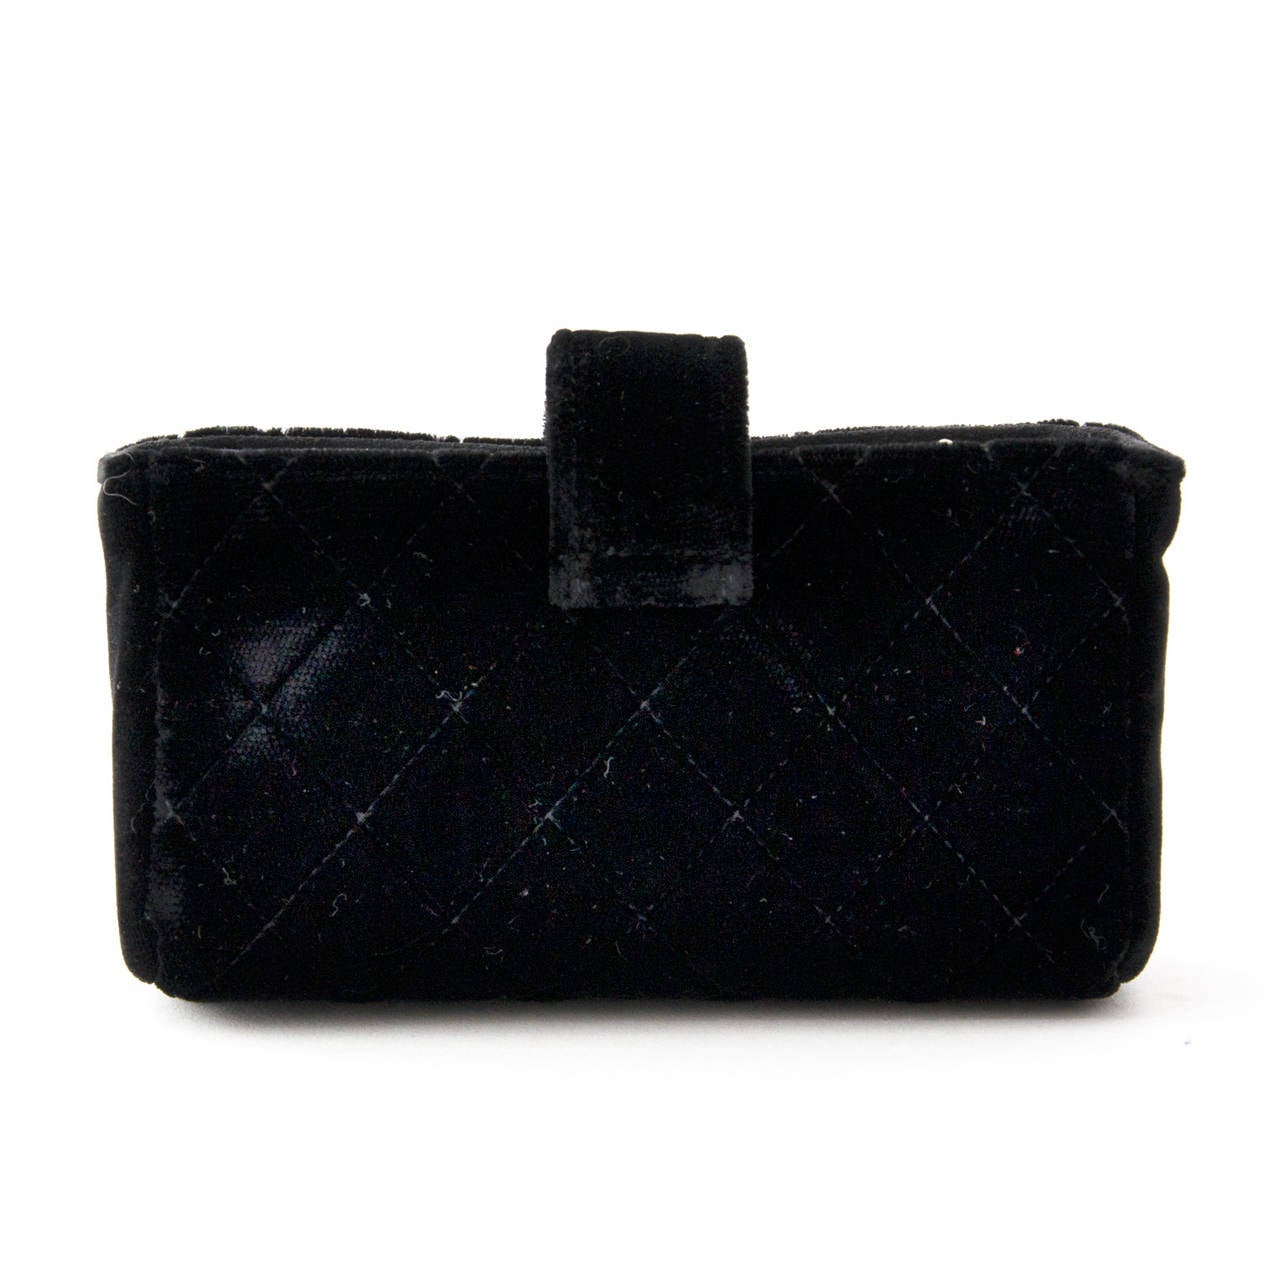 Darling mini Chanel clutch or purse. In thick, rich black velours with golden logo button.